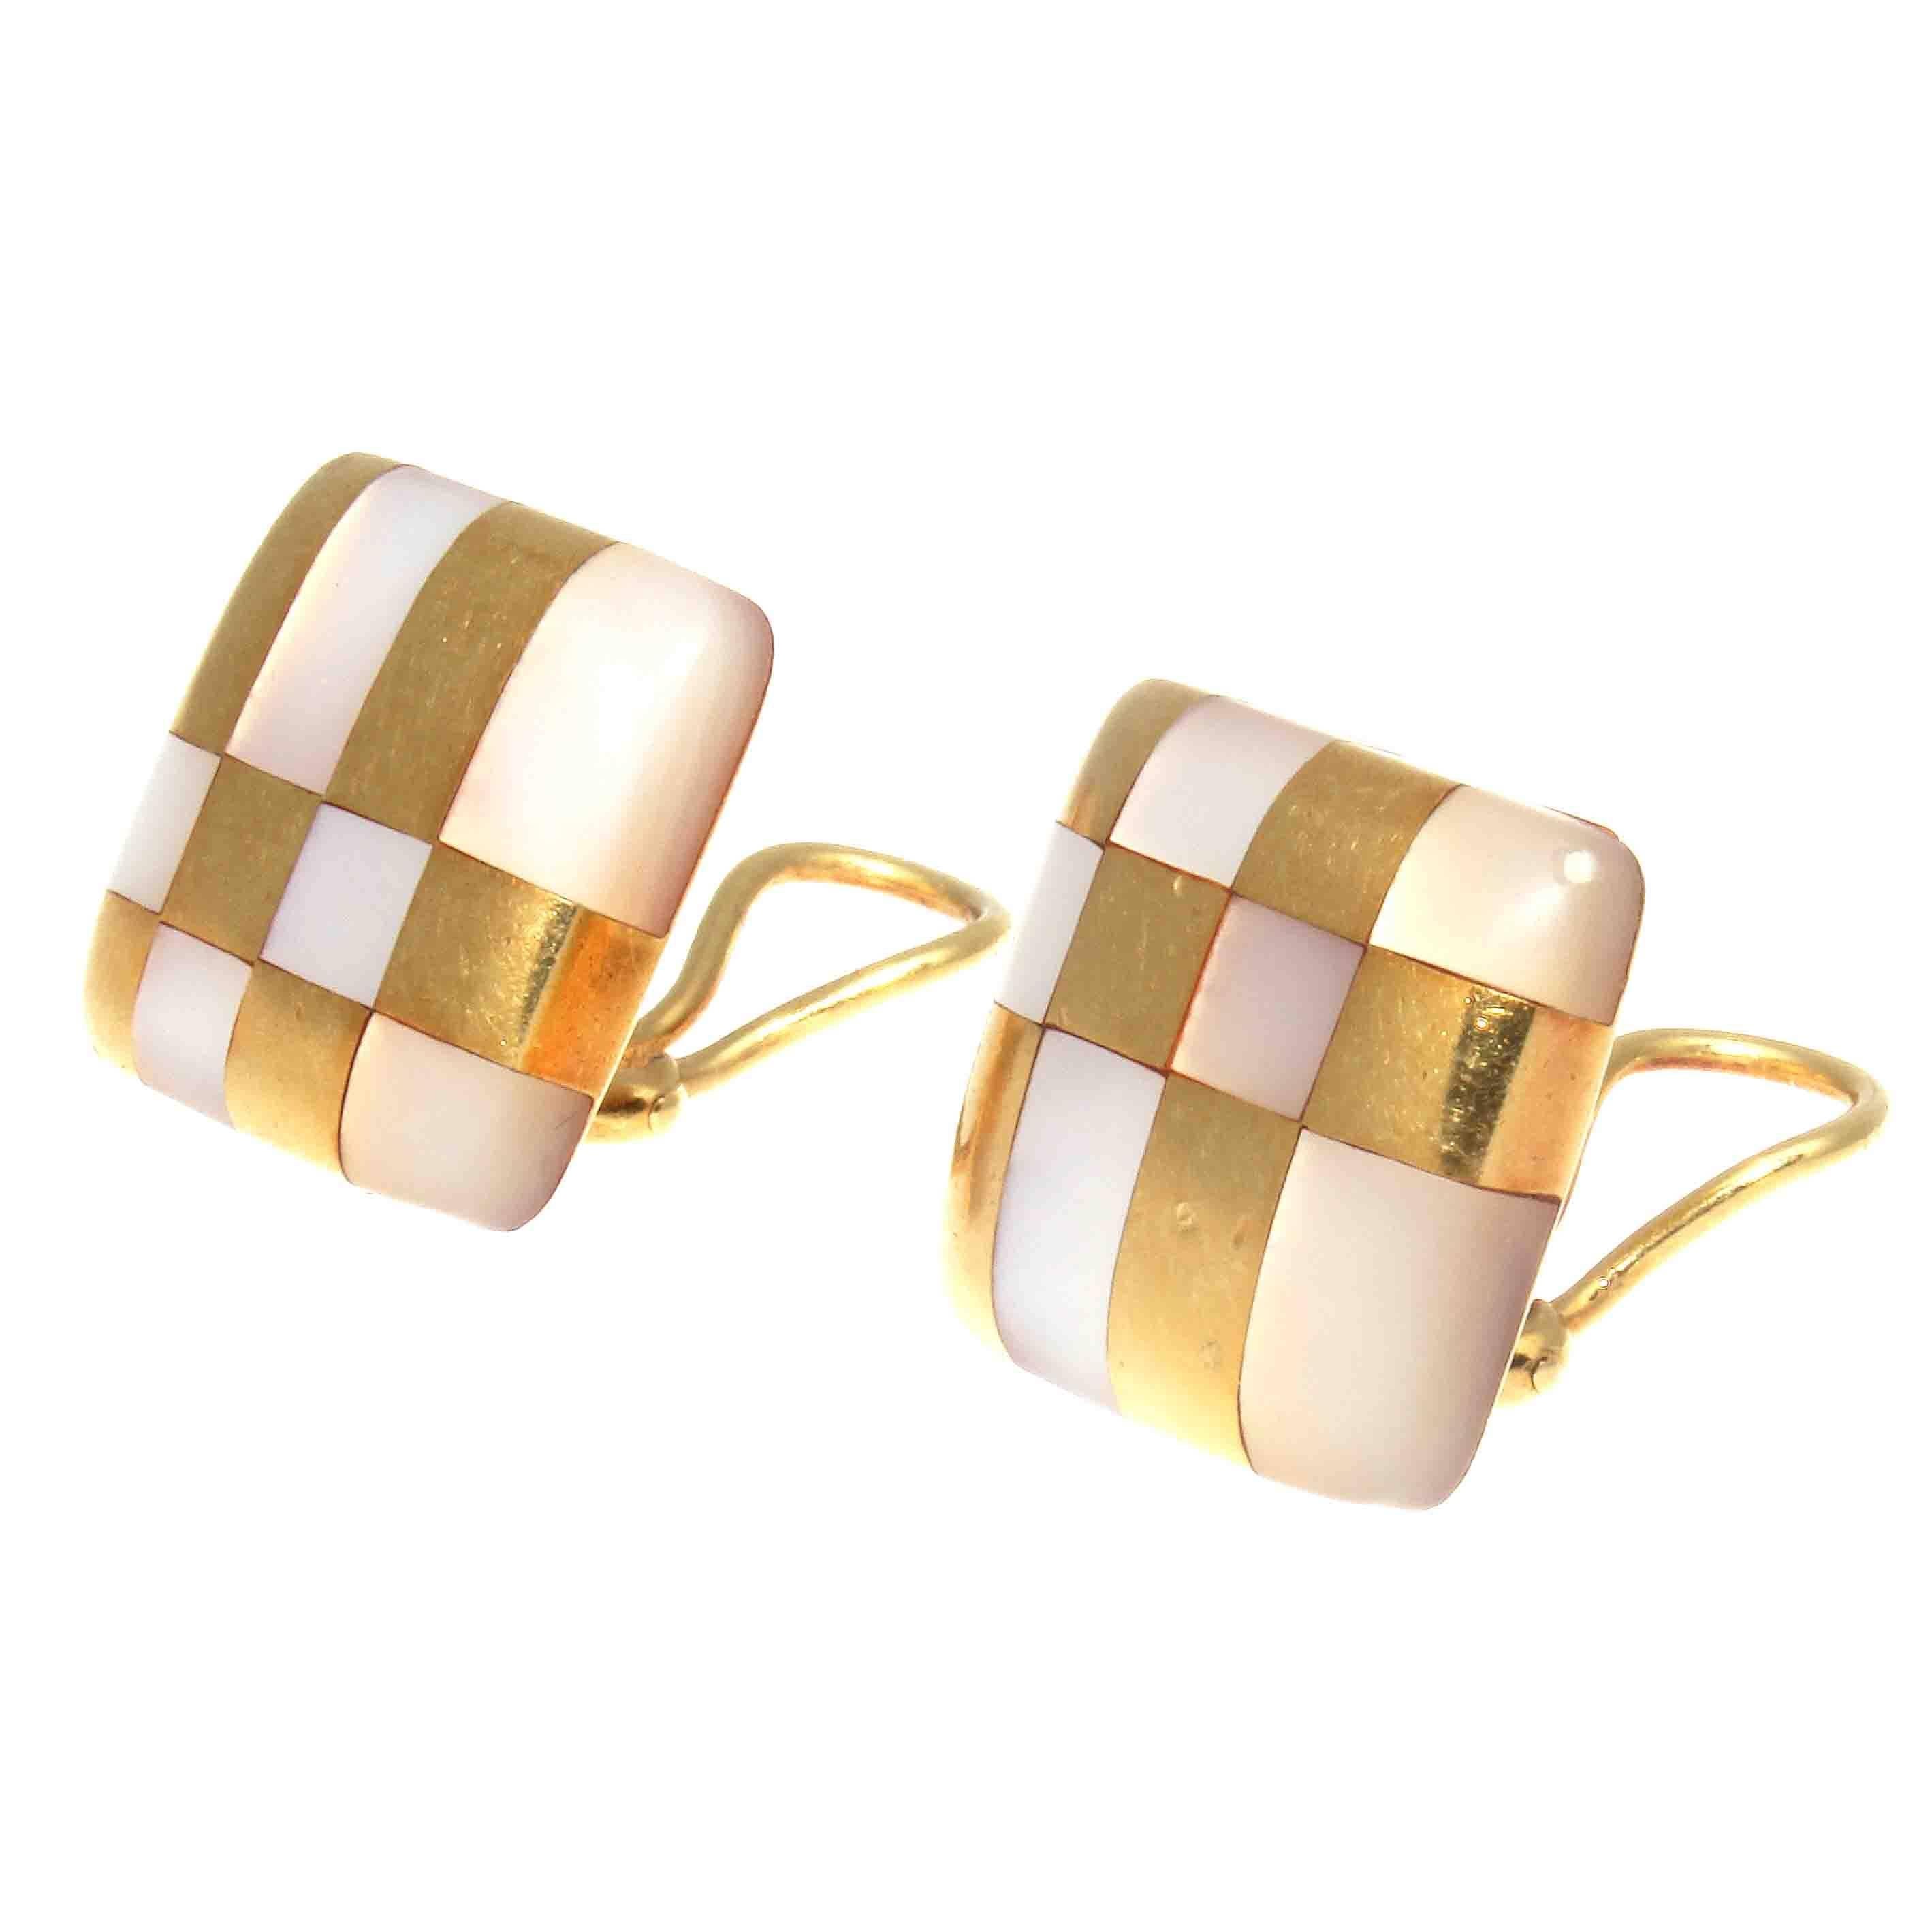 Tiffany & Co. Mother-of-Pearl Gold Earrings